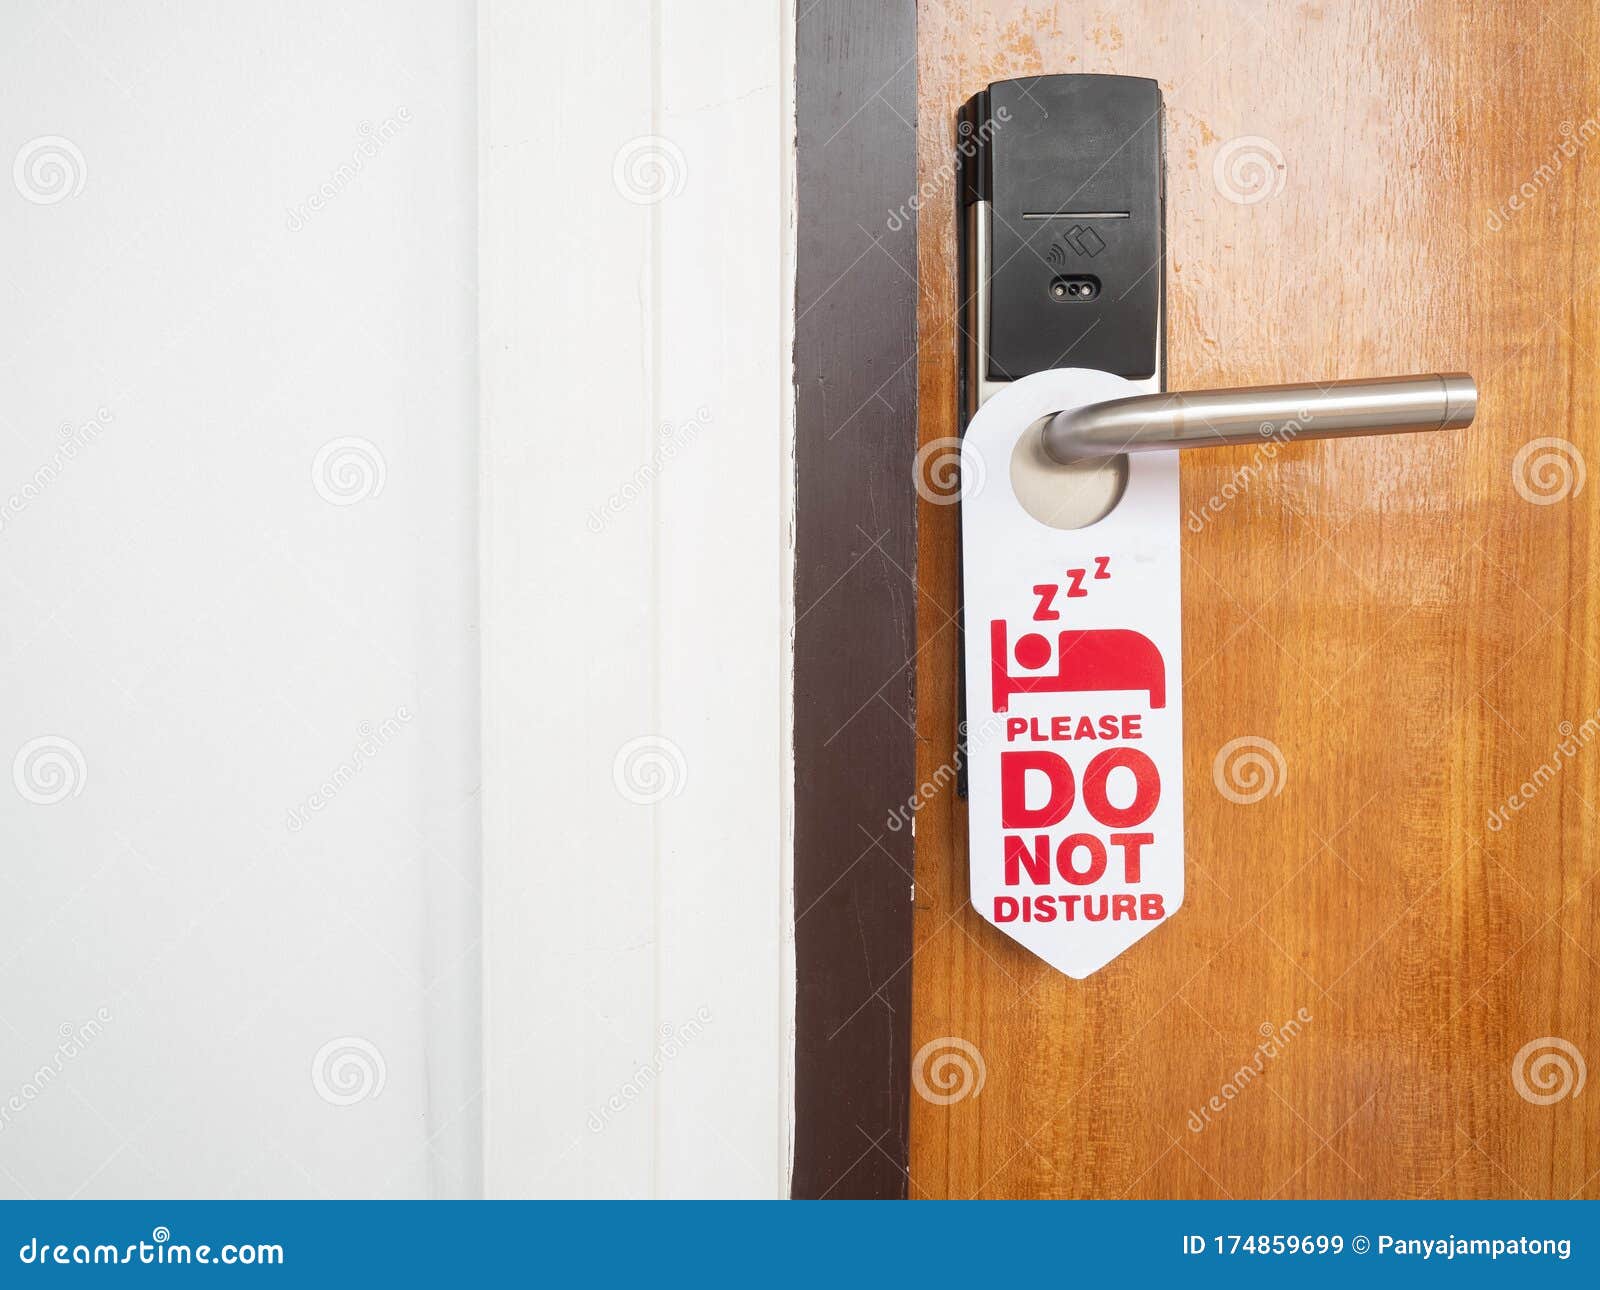 do not disturb sign attached